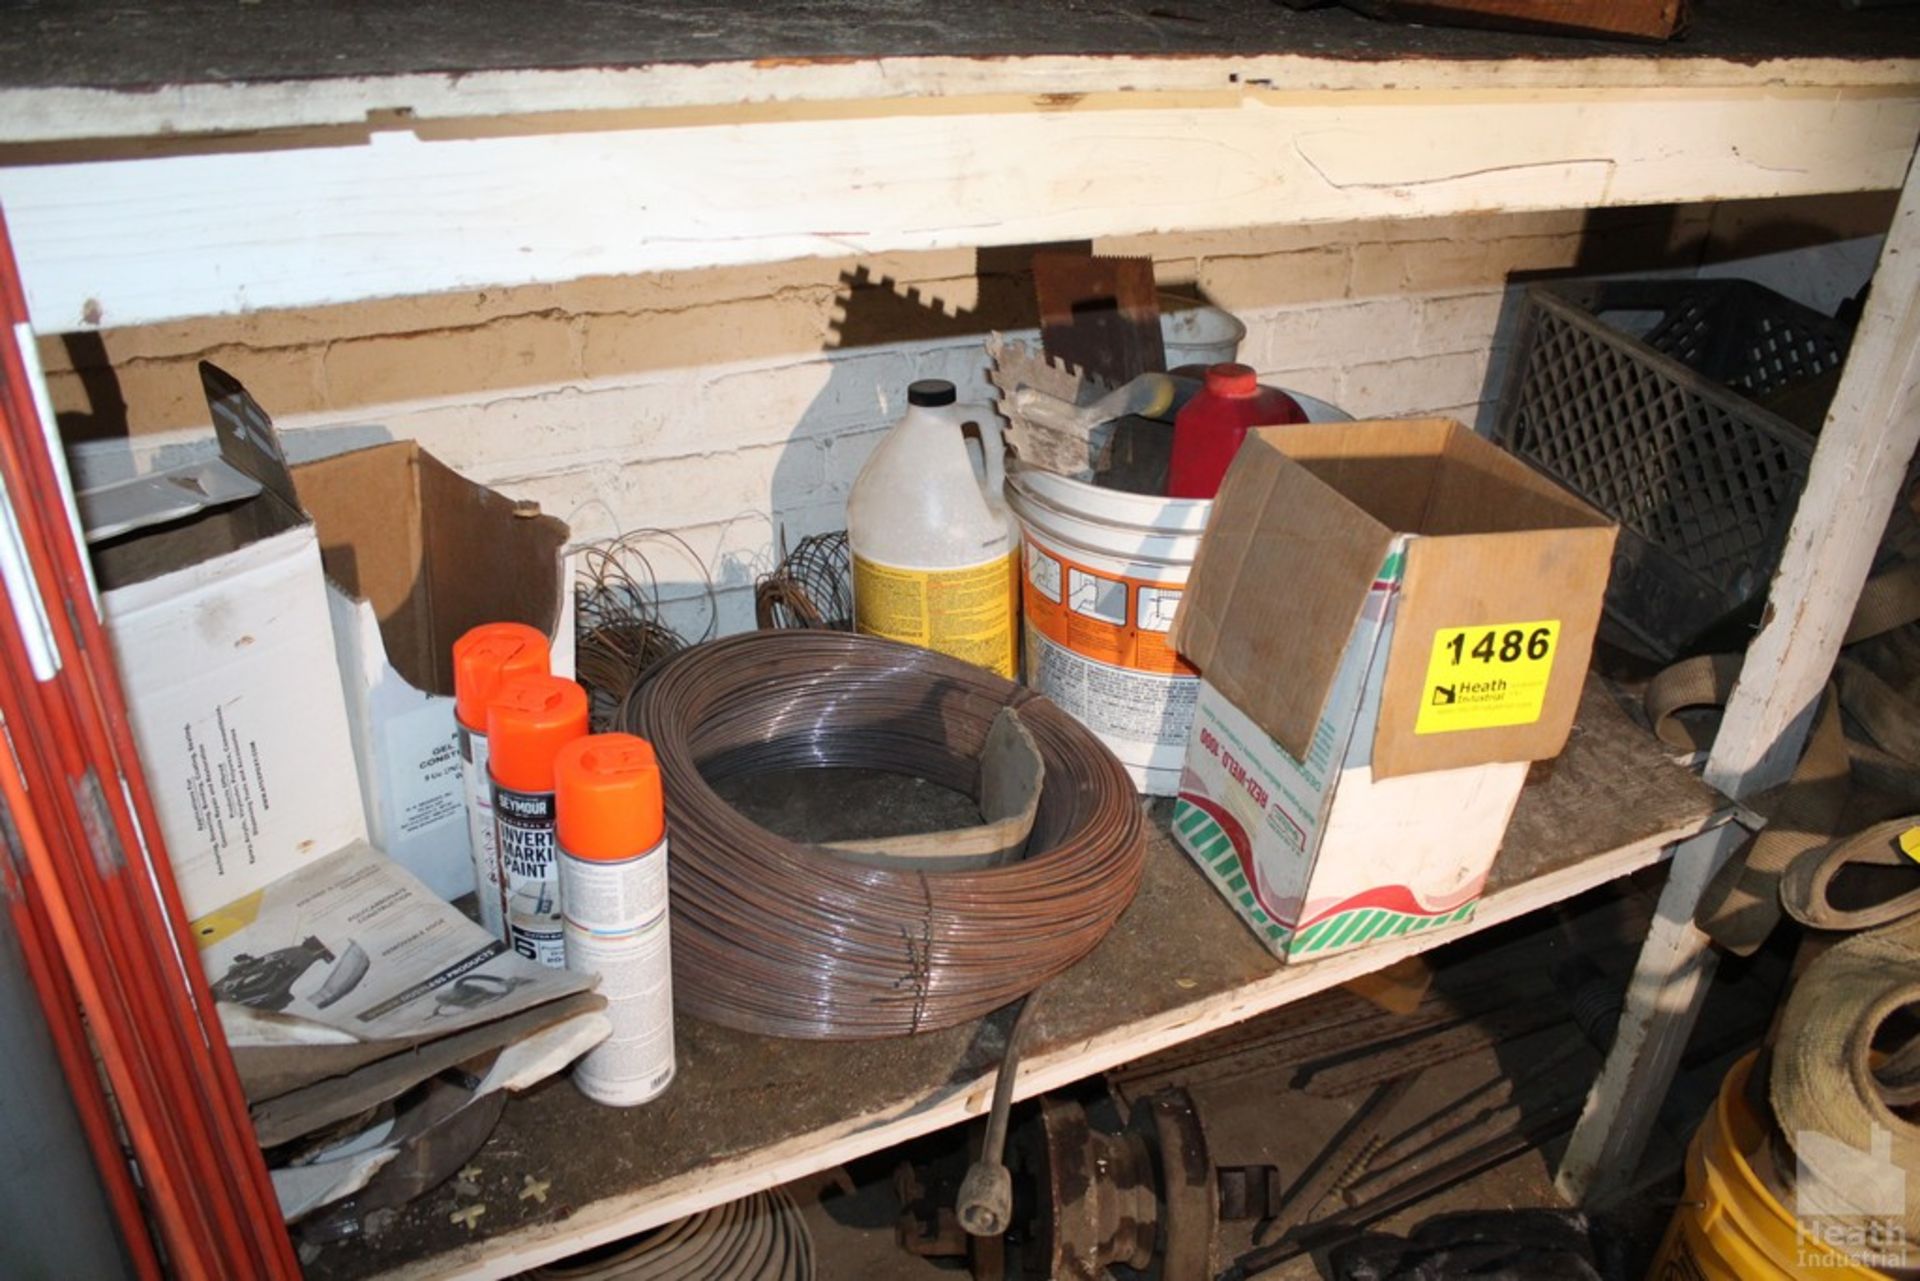 CONTENTS ON SHELF AND FLOOR (STEEL, WIRE, PAINT AND PARTS)